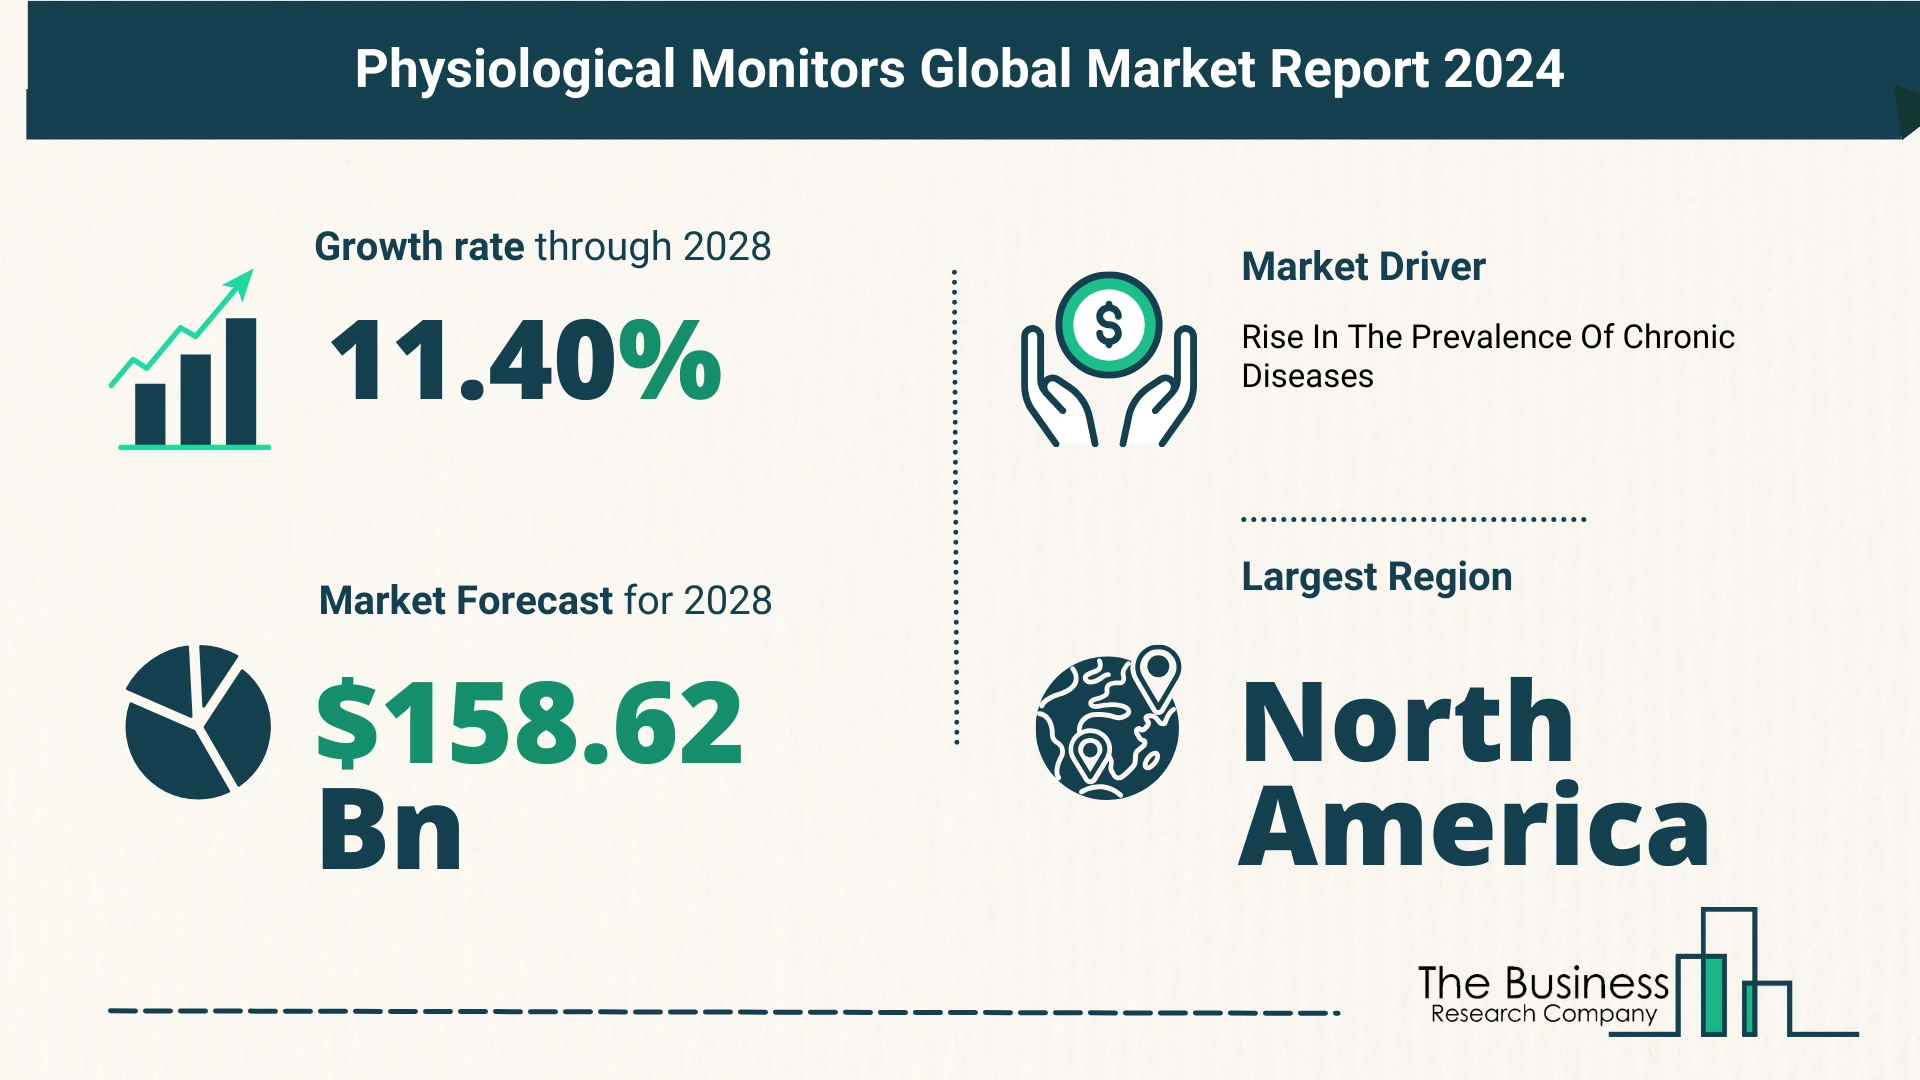 Global Physiological Monitors Market Size